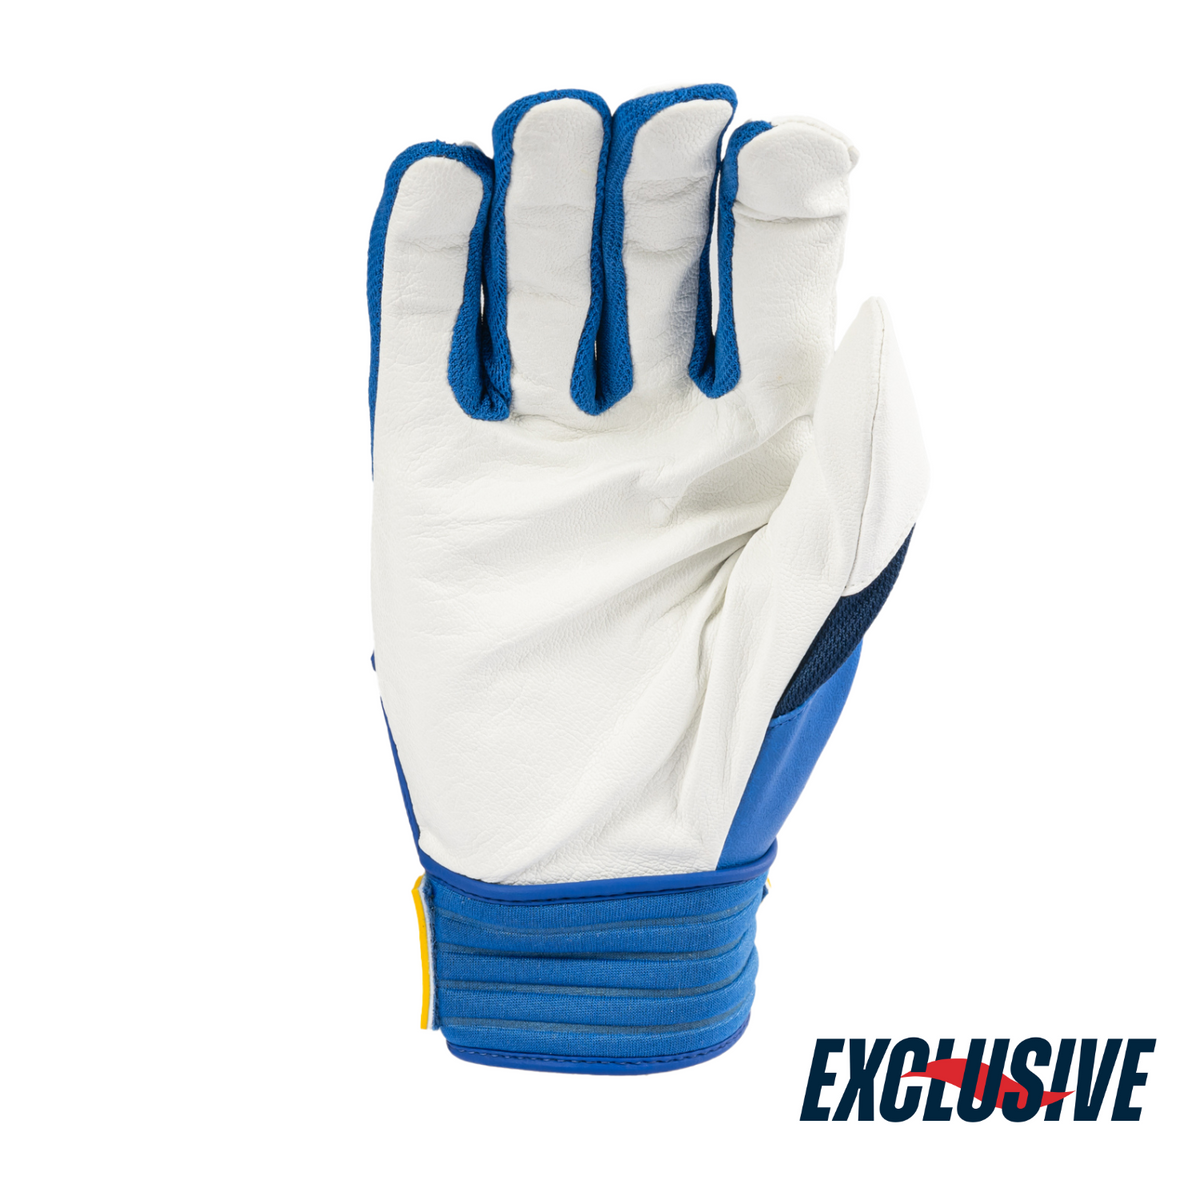 BATTING GLOVE LOUISVILLE SOLO YOUTH SMU BS24